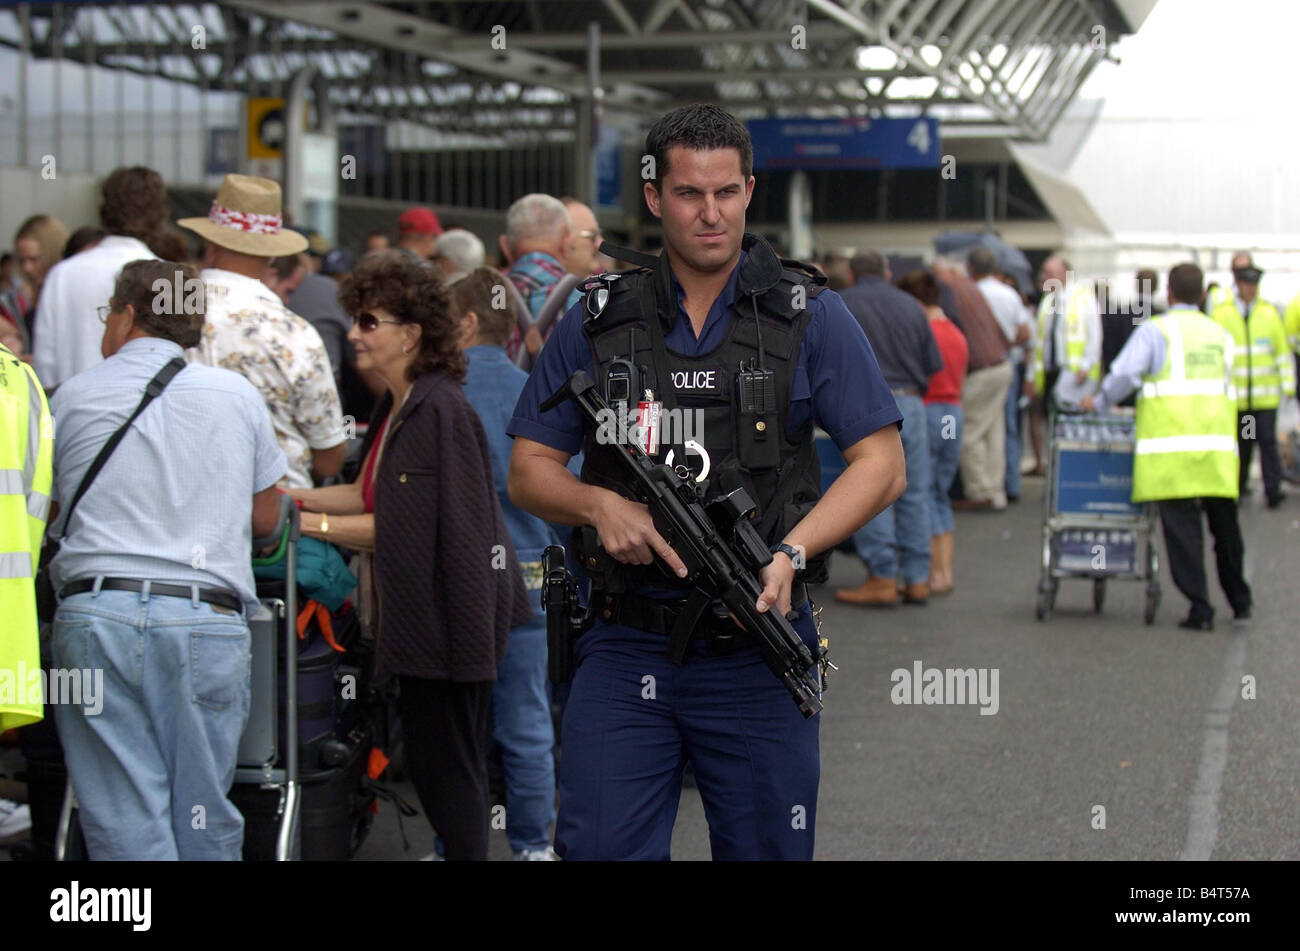 Armed police officers patrol the queues of passengers waiting outside Terminal Four at Heathrow airport where British Airways cancelled over 40 percent of its flights after the government and airport authorities brought in tougher security measures after an aborted bomb plot August 2006 Stock Photo